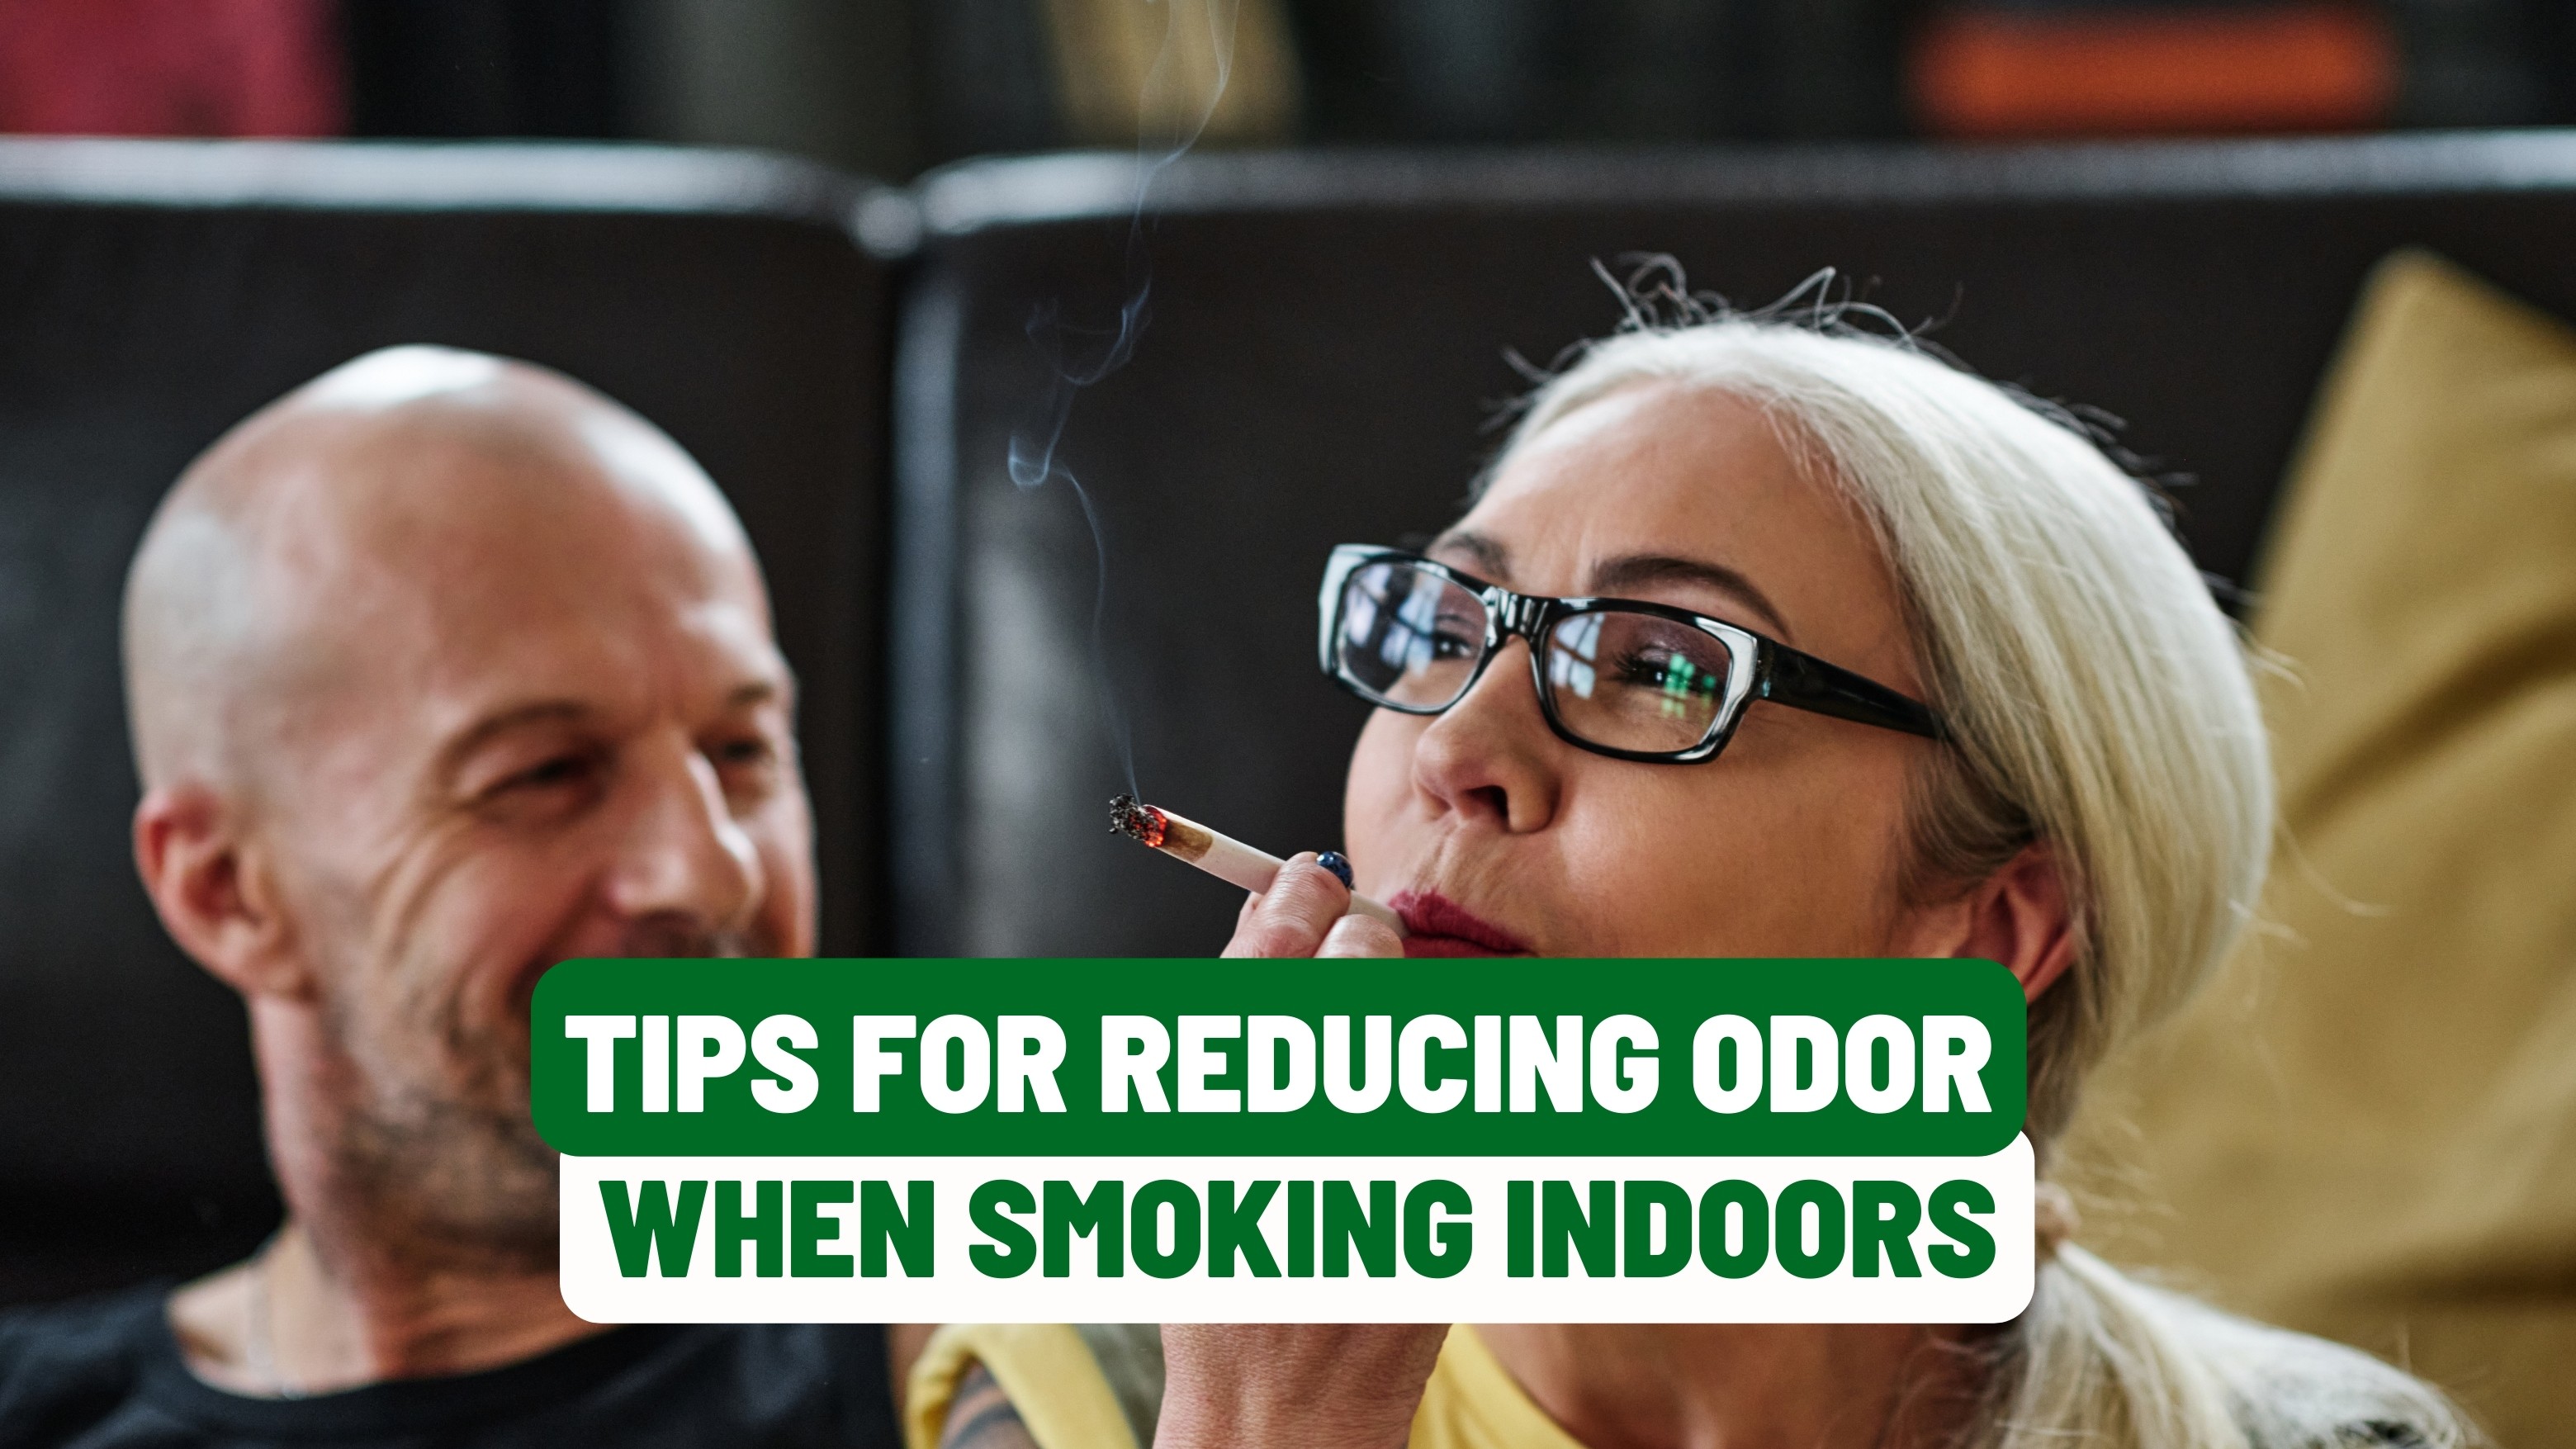 Tips for Reducing Odor When Smoking Indoors